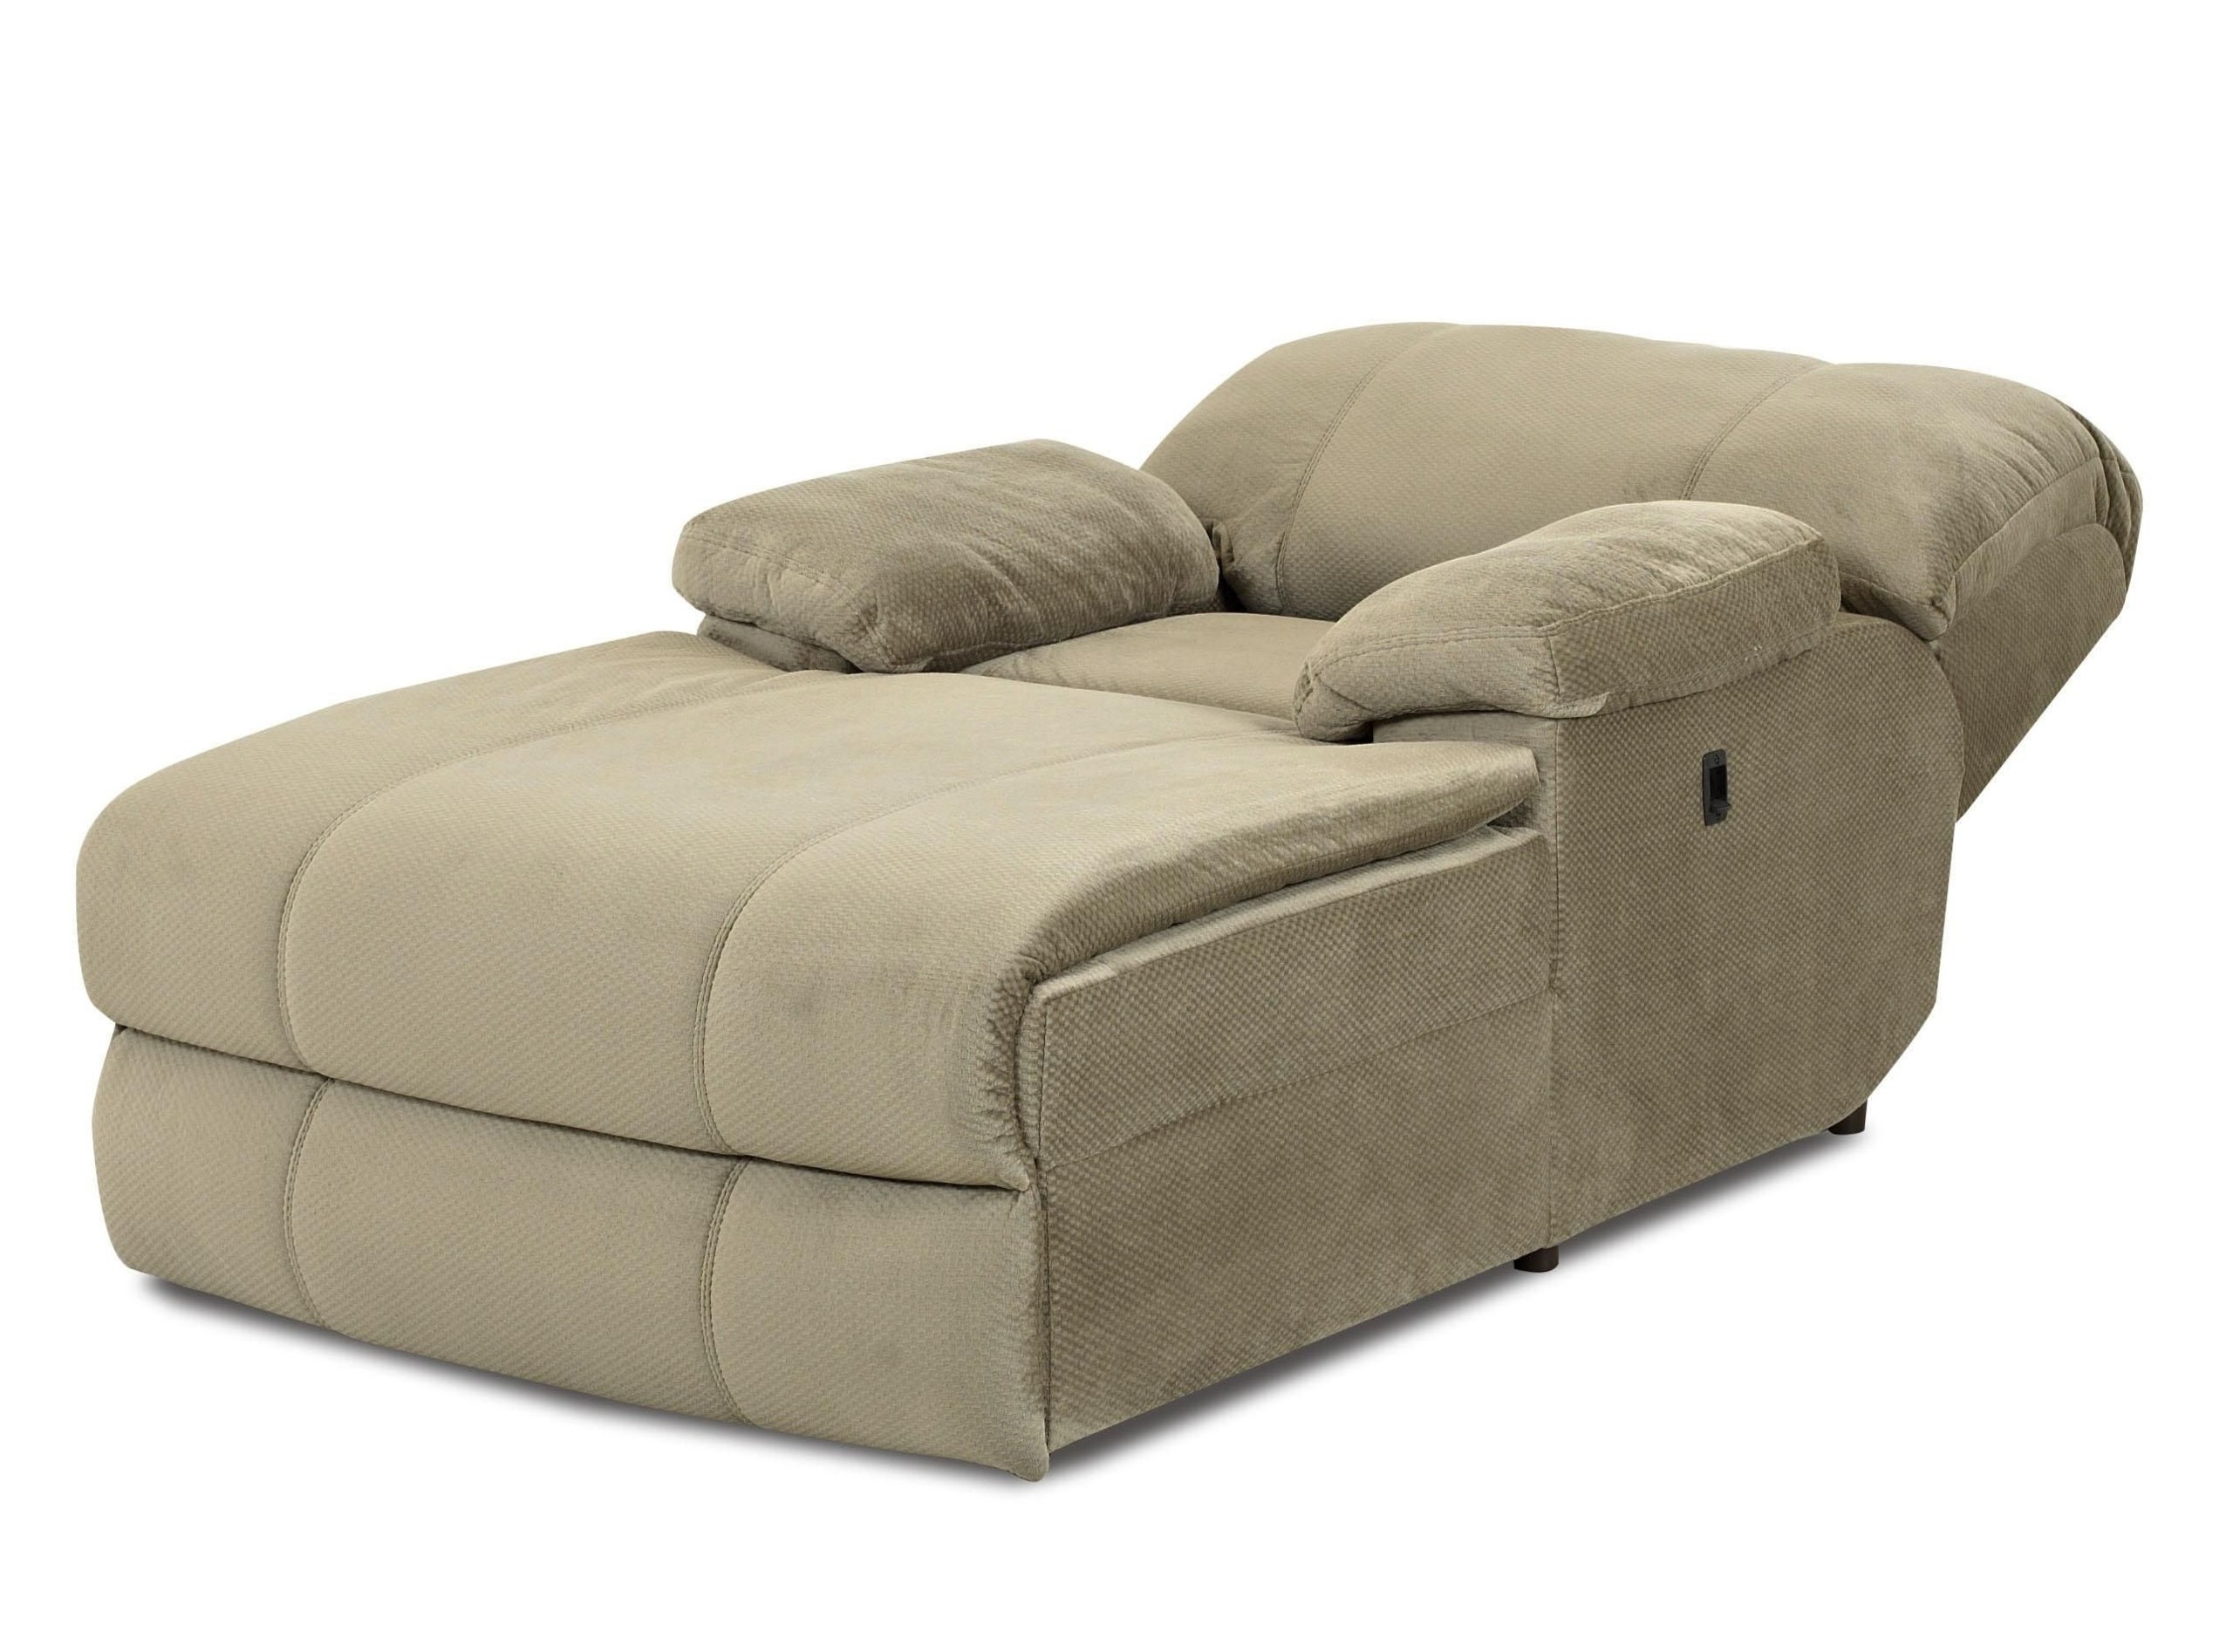 2021 latest 2 person indoor chaise lounges 3